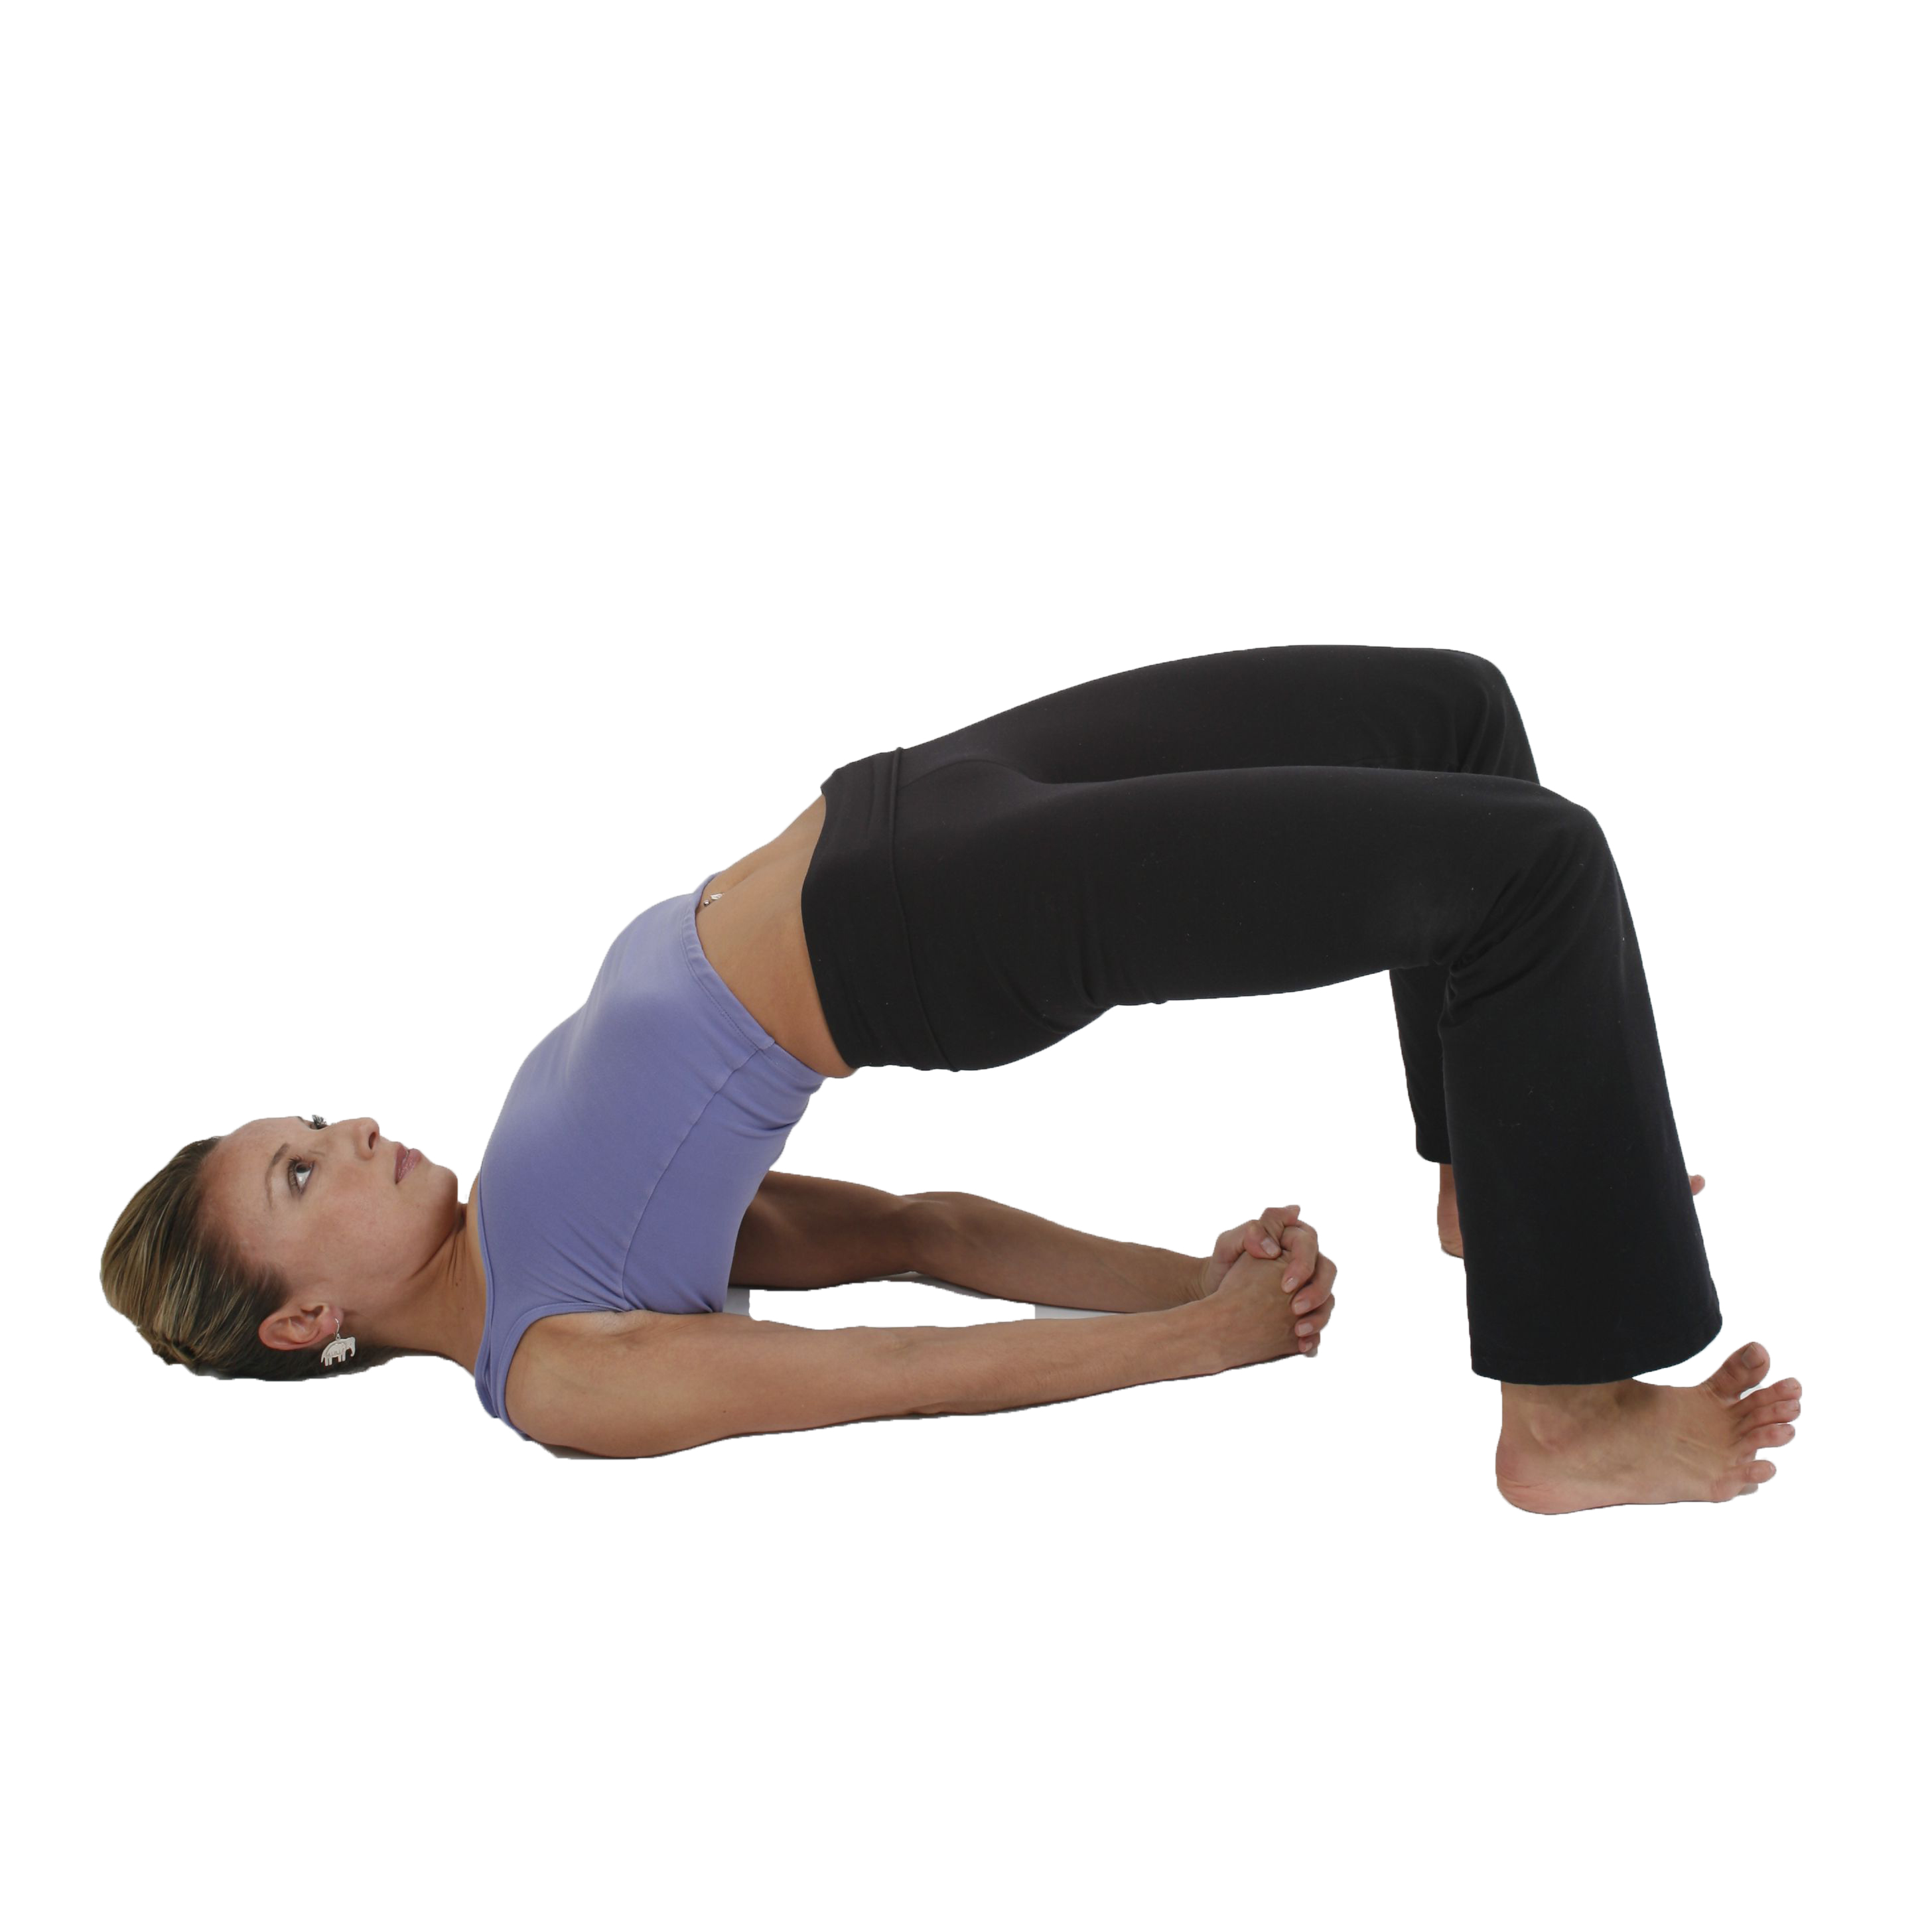 What are the Health Benefits of Marjariasana and How to Perform?